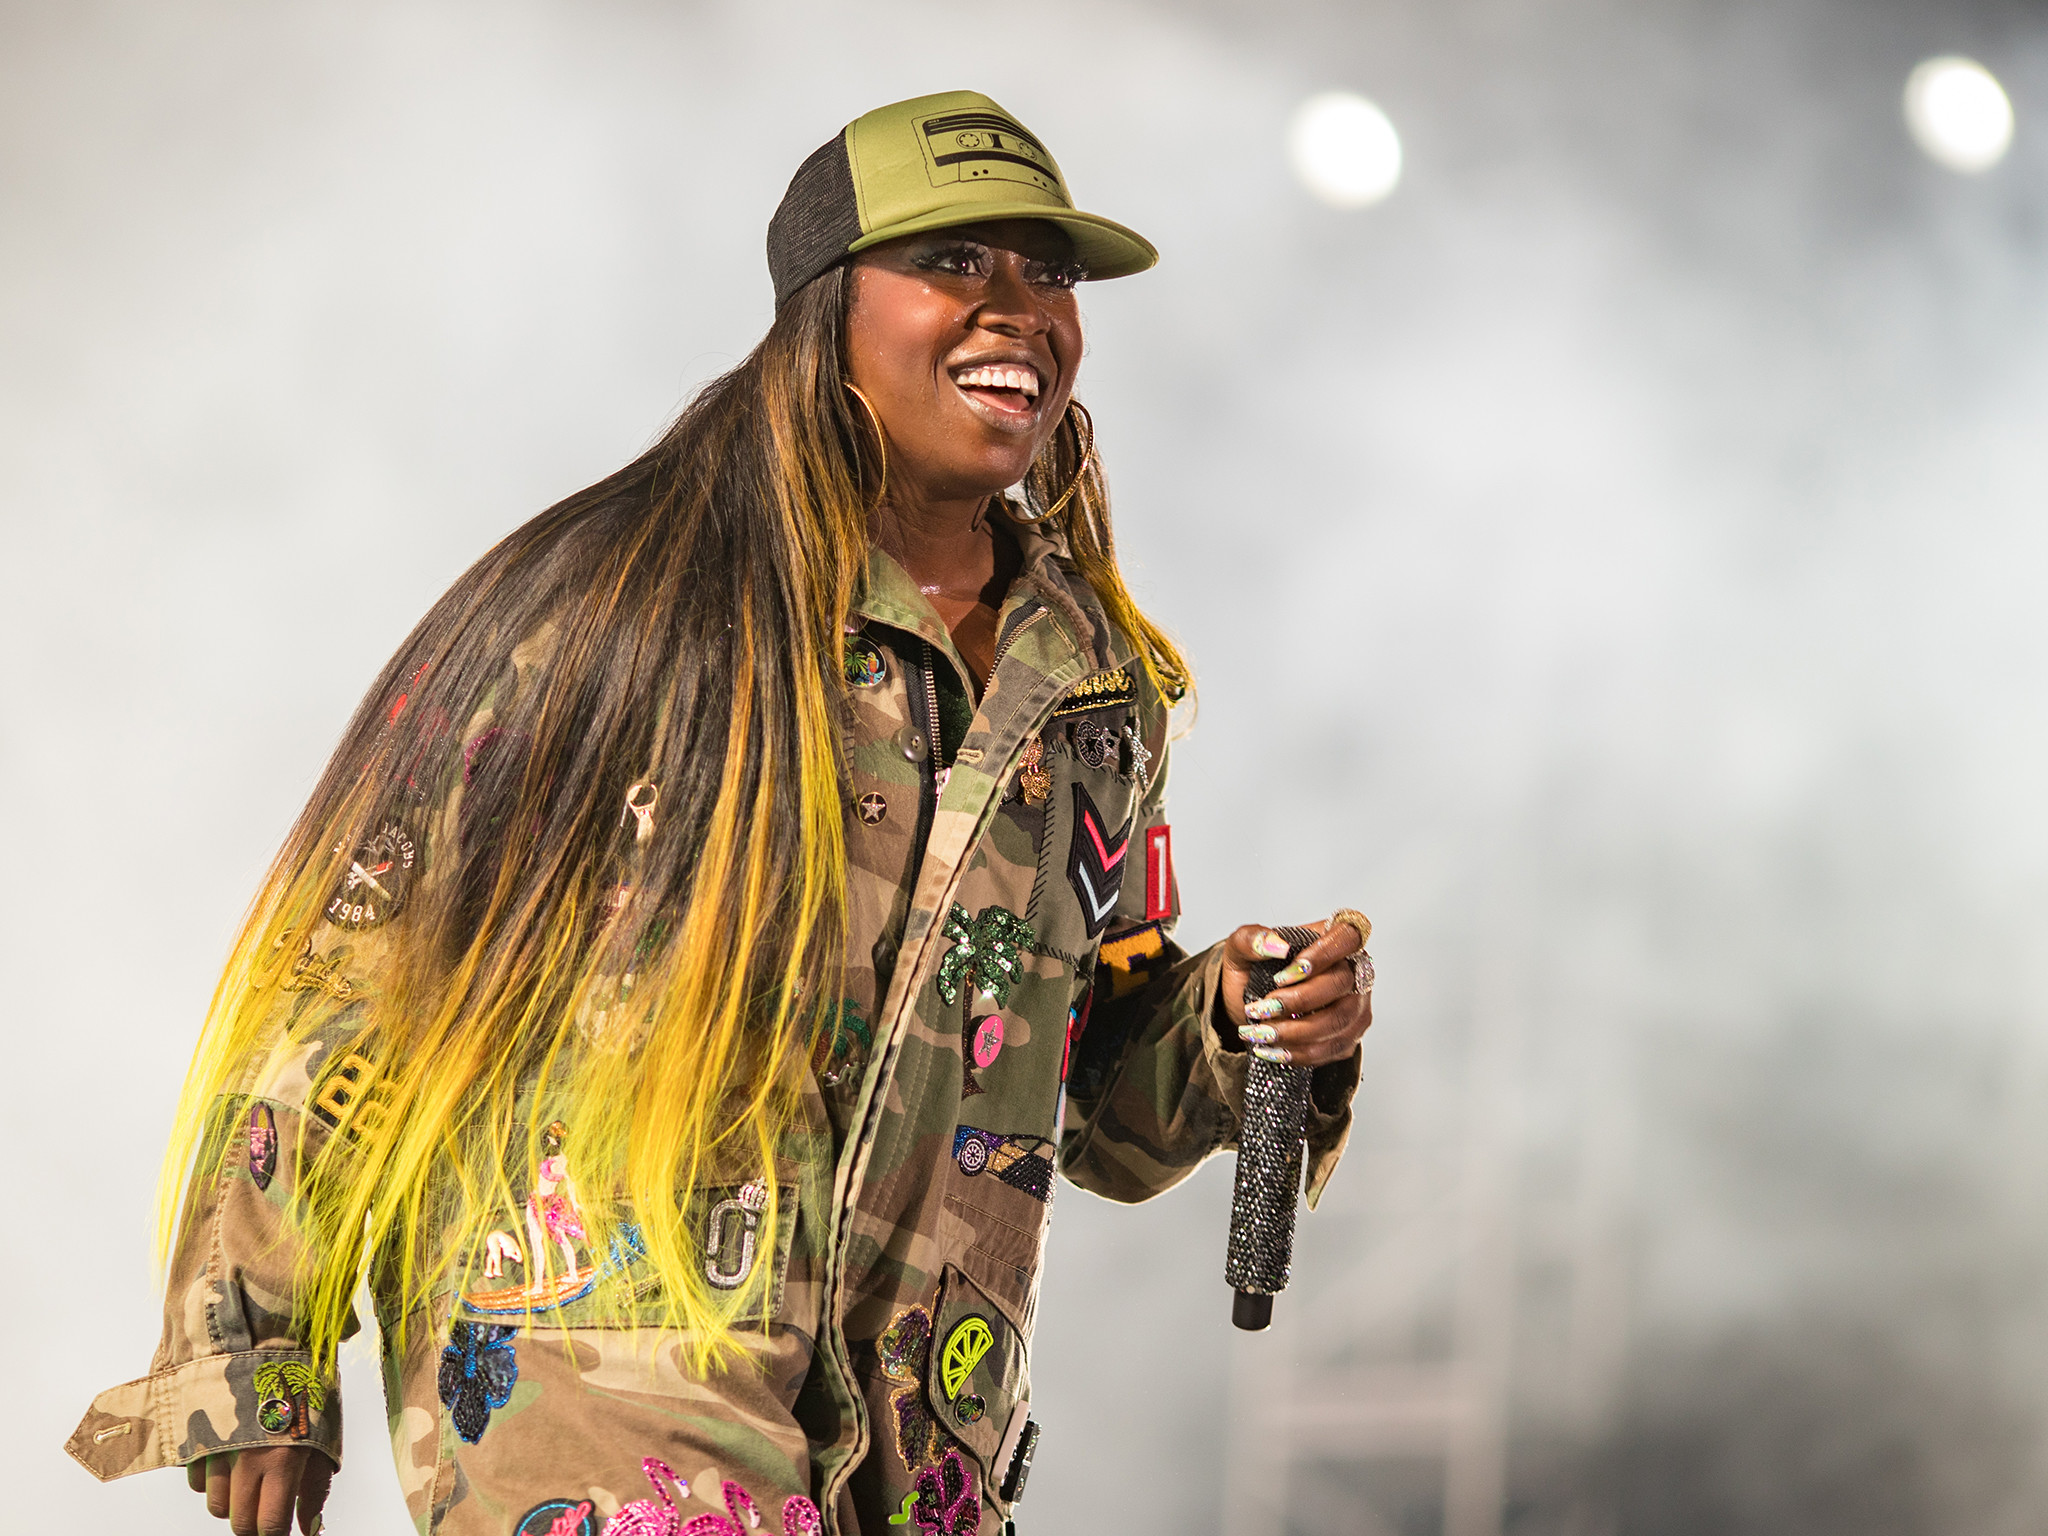 2048x1536 Petition to replace Confederate monument with statue of Missy Elliott  signed by thousands | The Independent